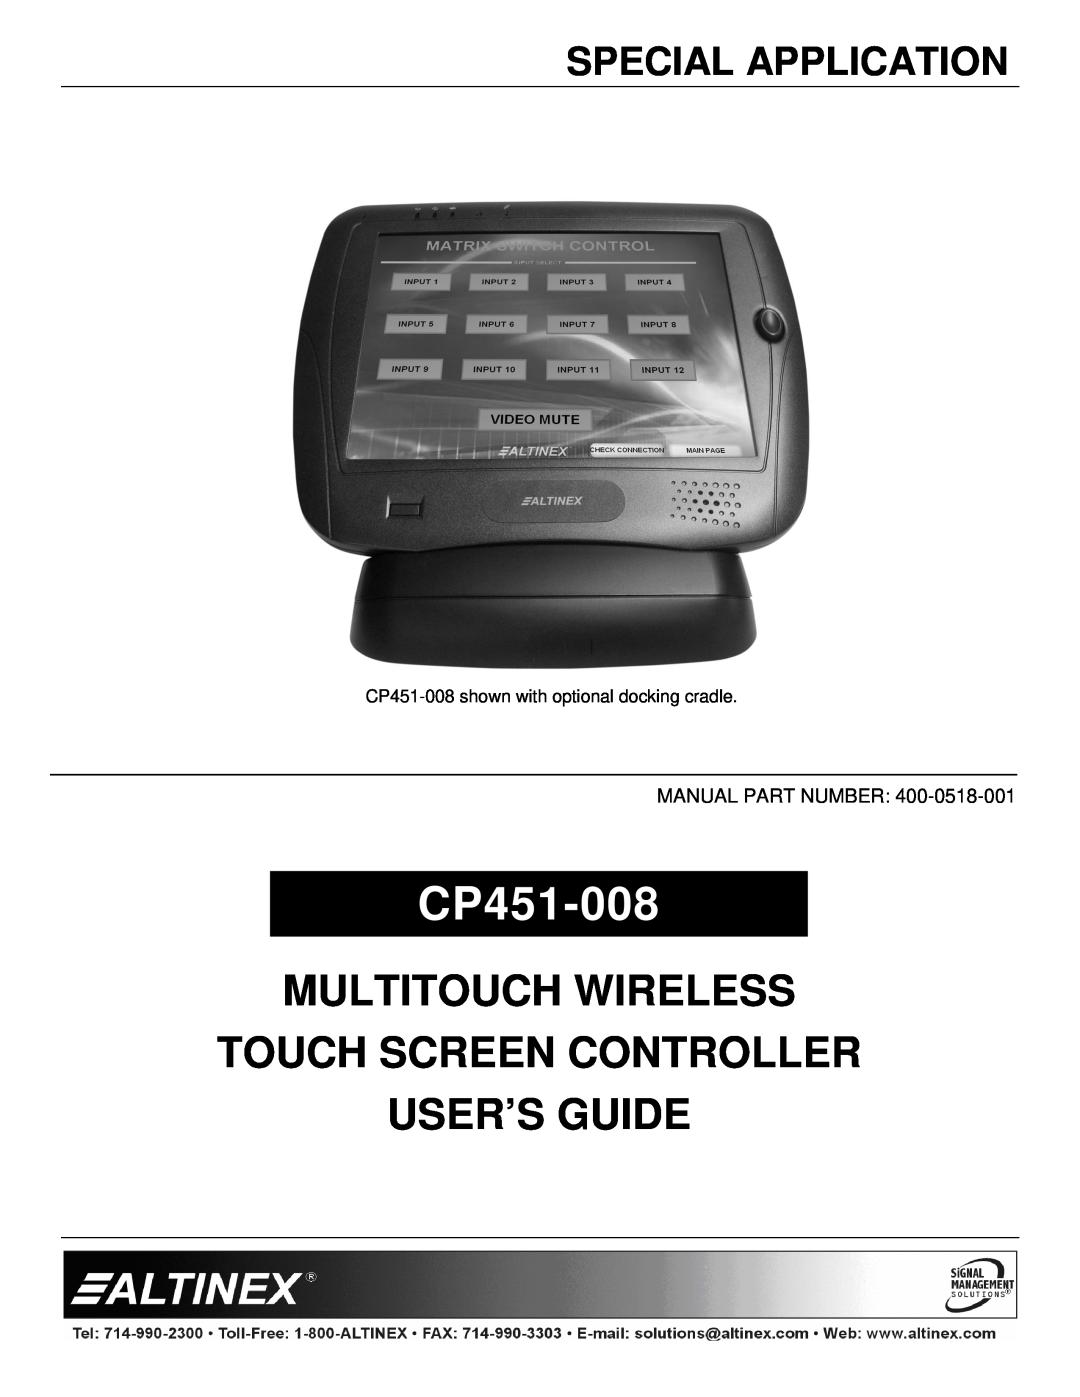 Altinex CP451-008 manual Special Application, Multitouch Wireless Touch Screen Controller User’S Guide 